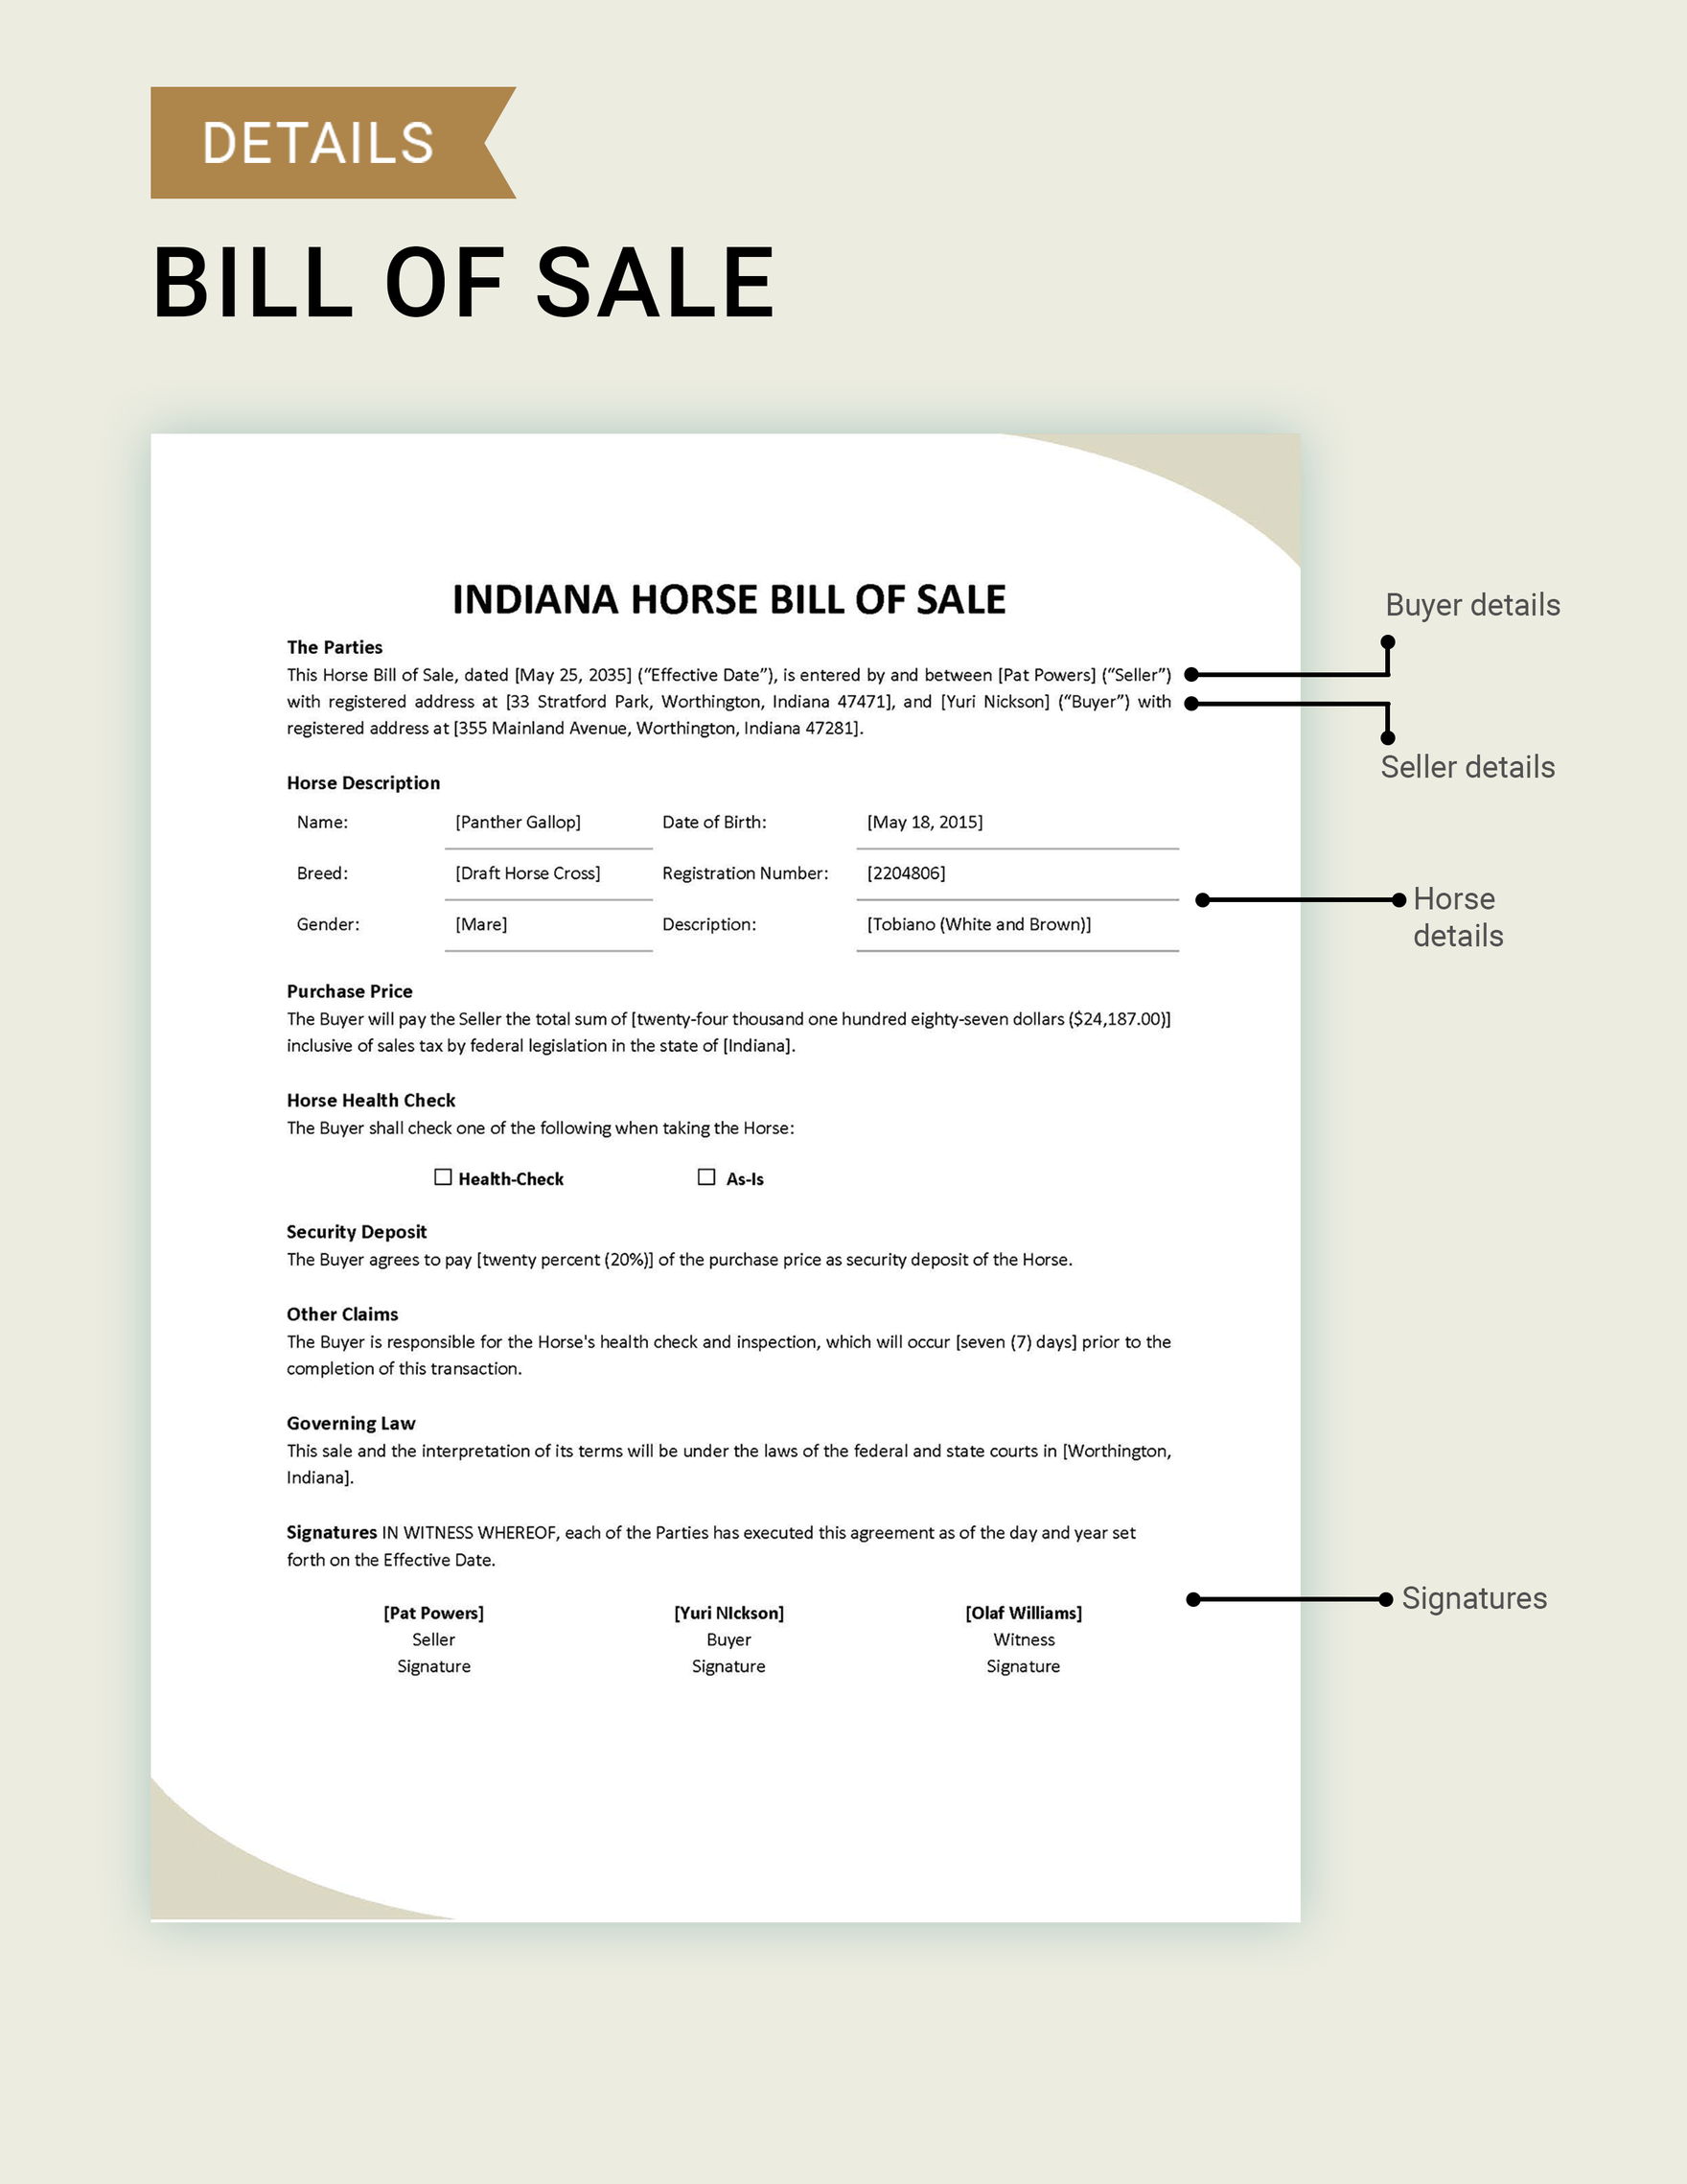 Indiana Horse Bill of Sale Template